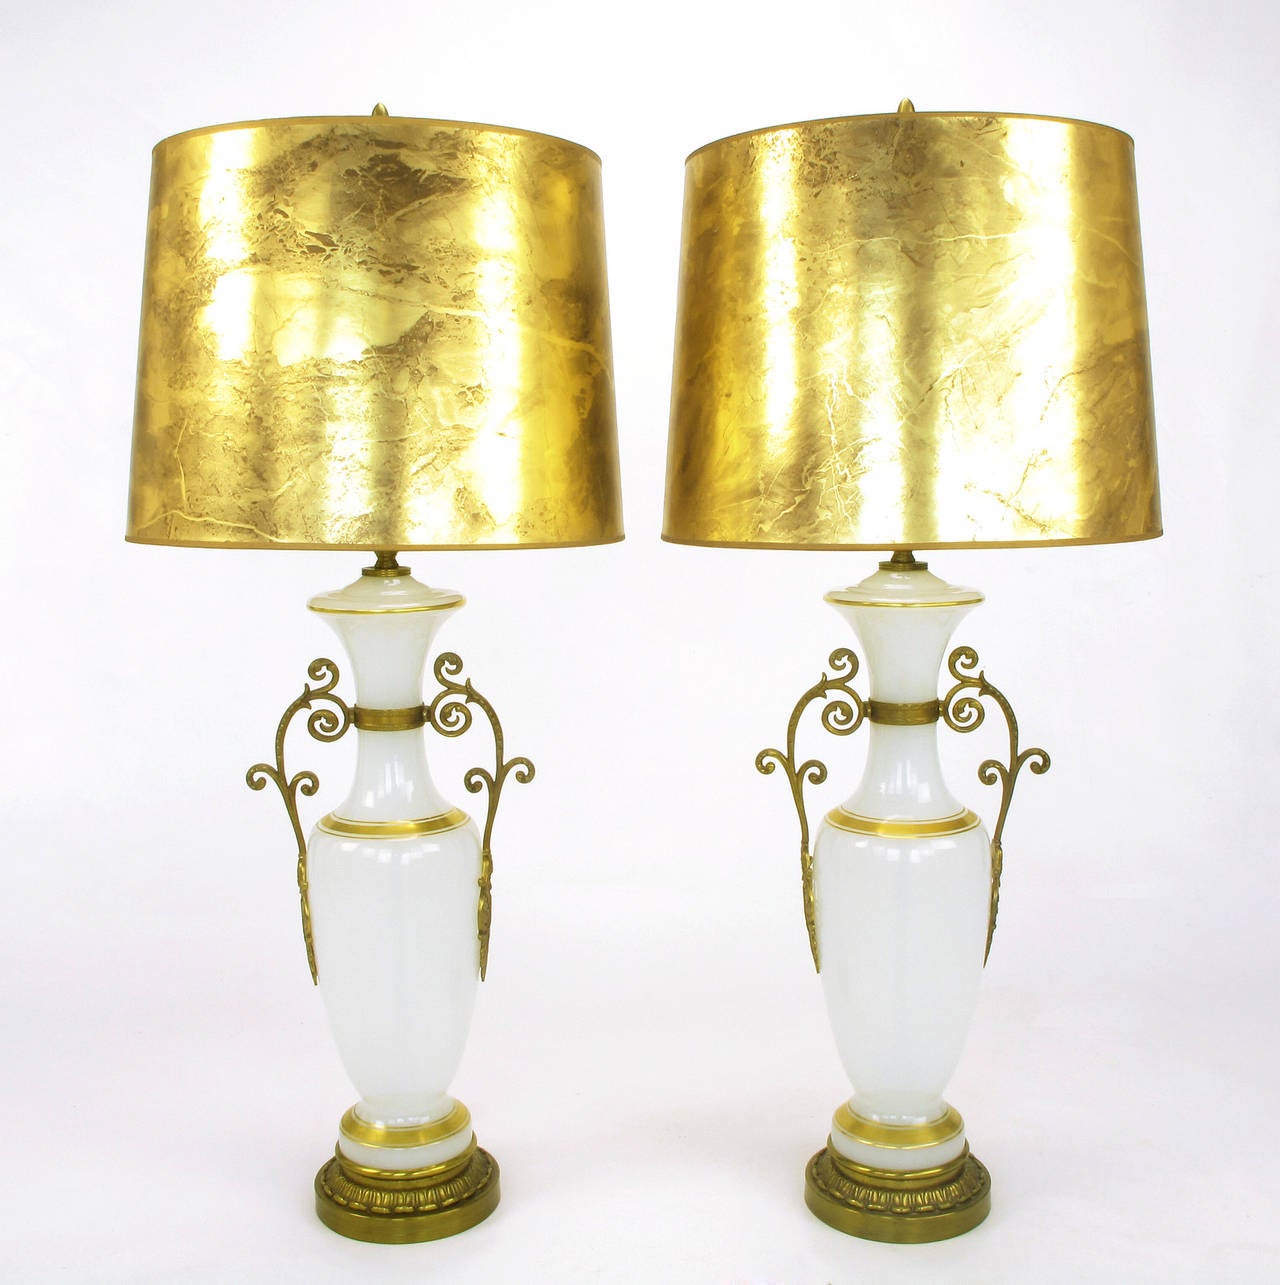 Pair of Chapman neoclassical white milk glass vase shaped table lamps with gilt striping. Filigreed brass handles and cast brass base, brass stem and double socket cluster. Sold sans shades.